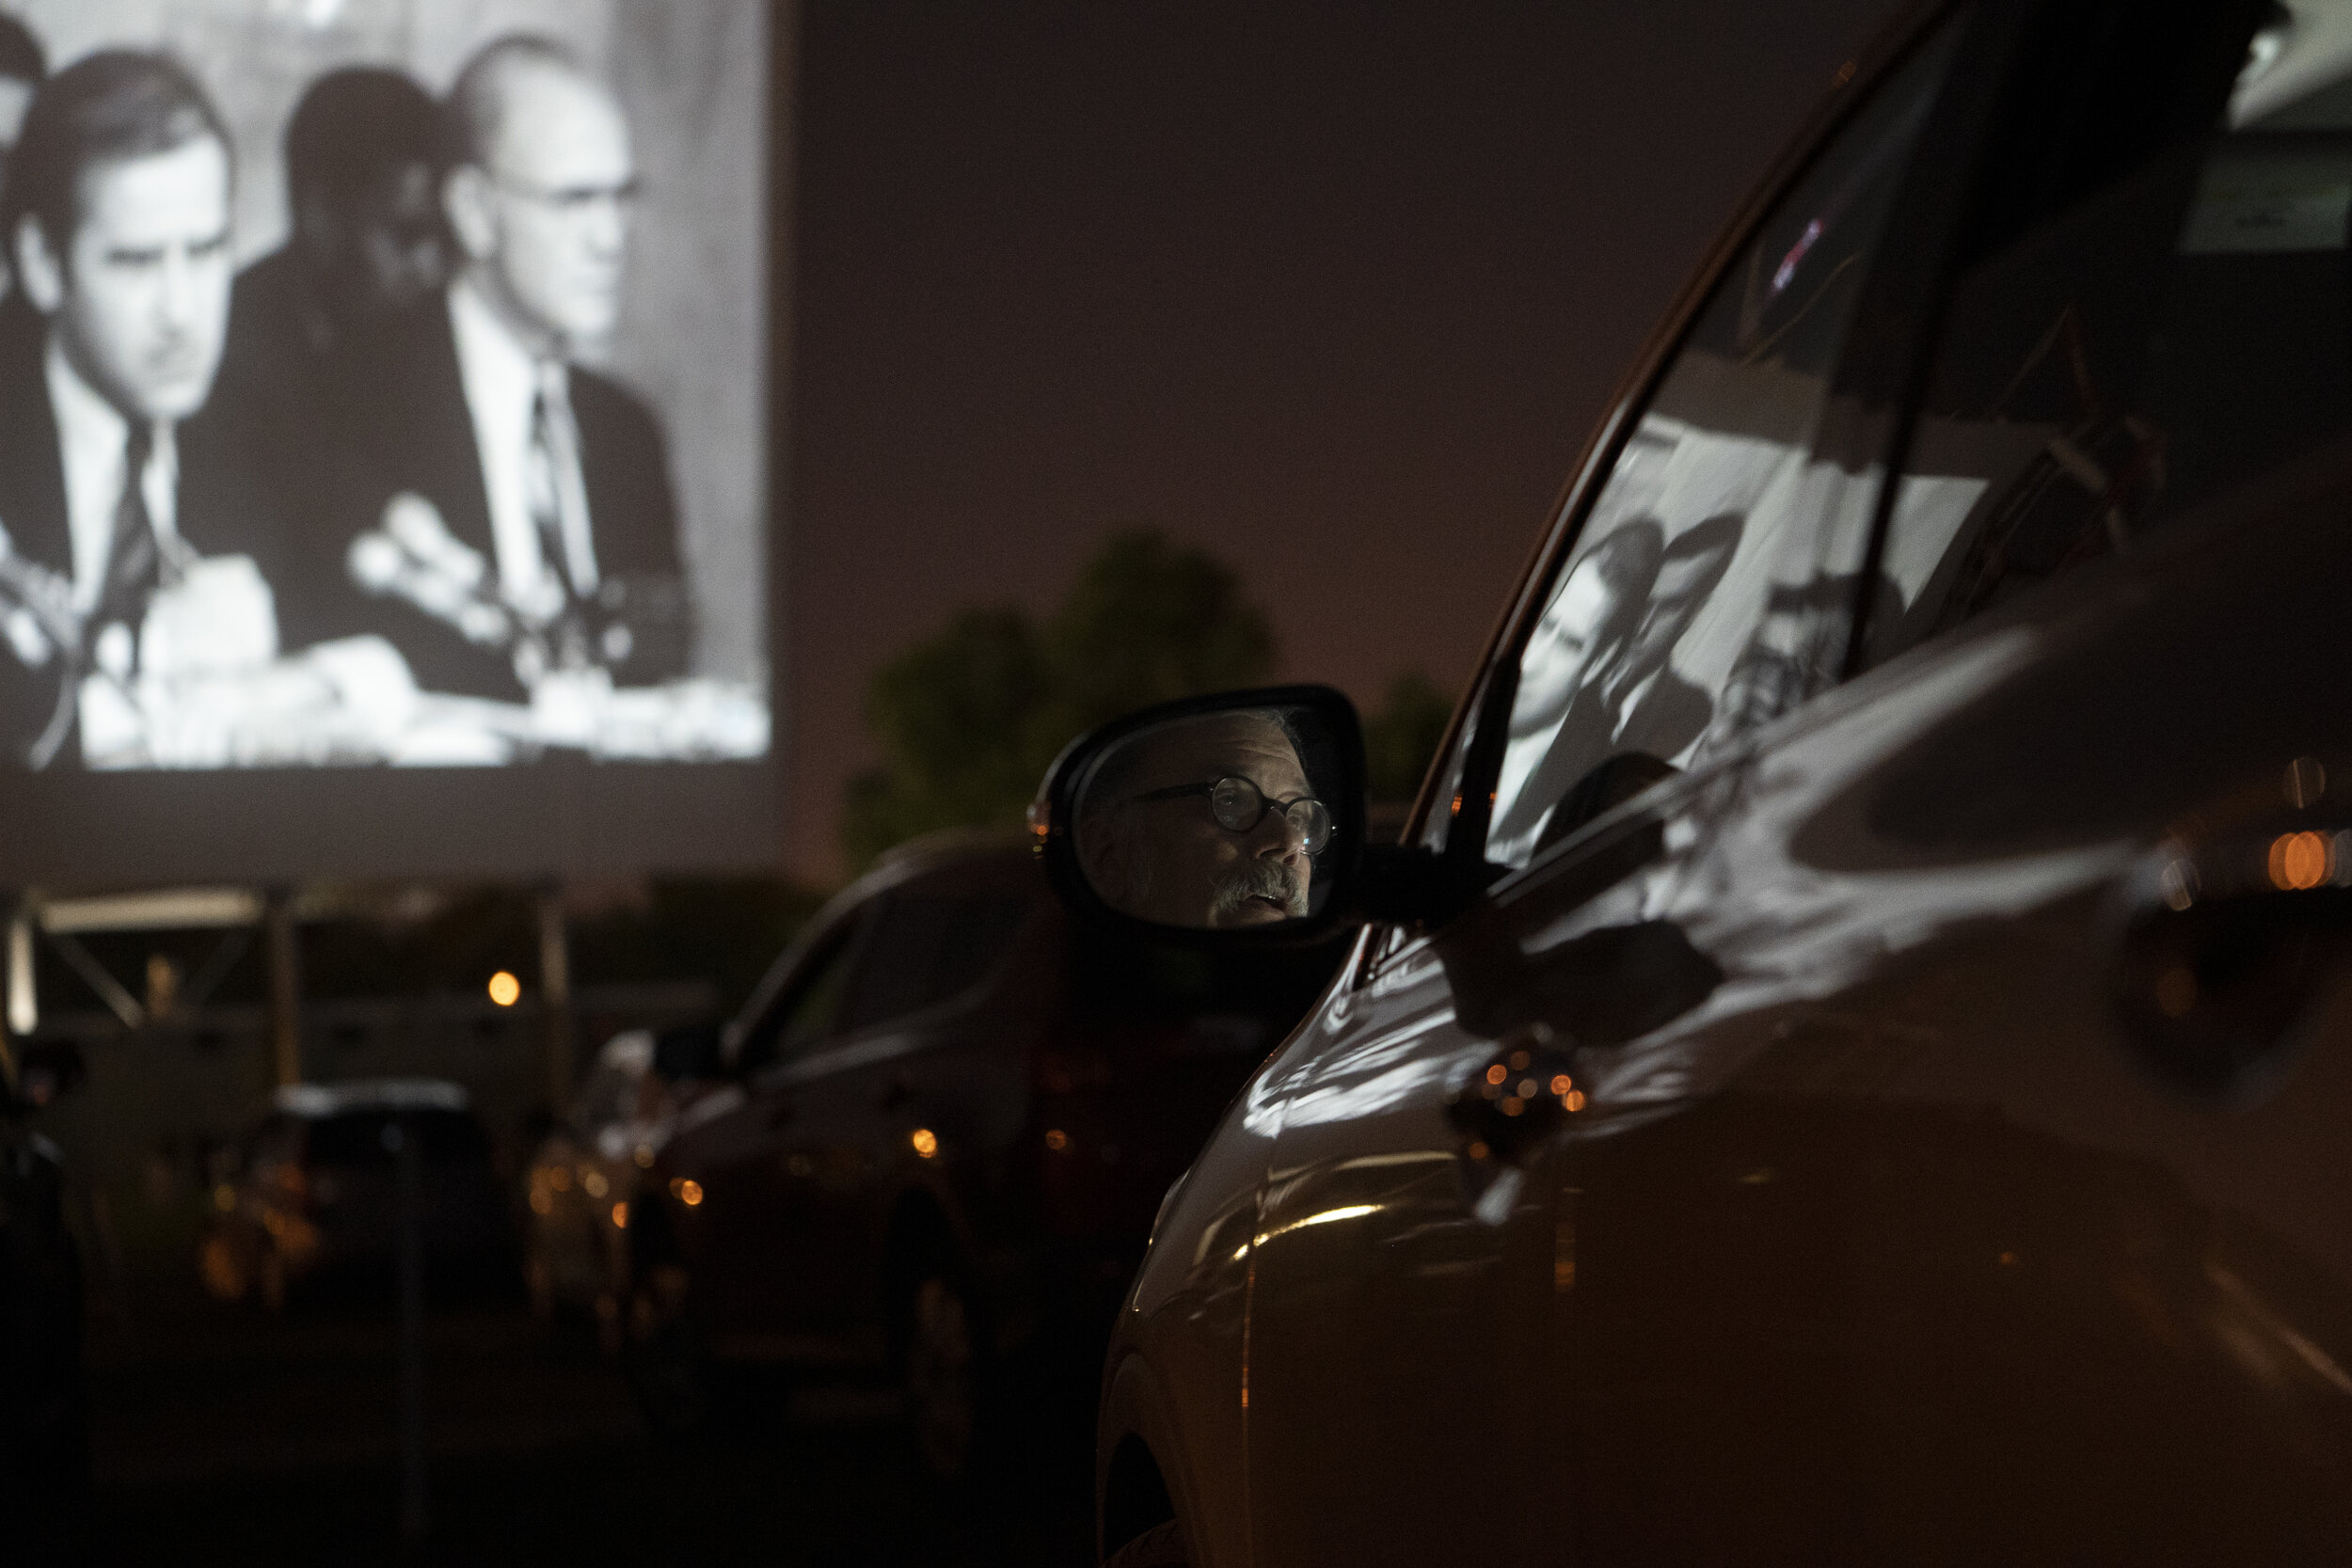  TULSA, OKLAHOMA - August 20: Demetrius Bereolos watches the final night of the DNC from his car at the Admiral Twin Drive In in Tulsa, Oklahoma on August 20, 2020. (Photo by Nick Oxford for The Washington Post) 